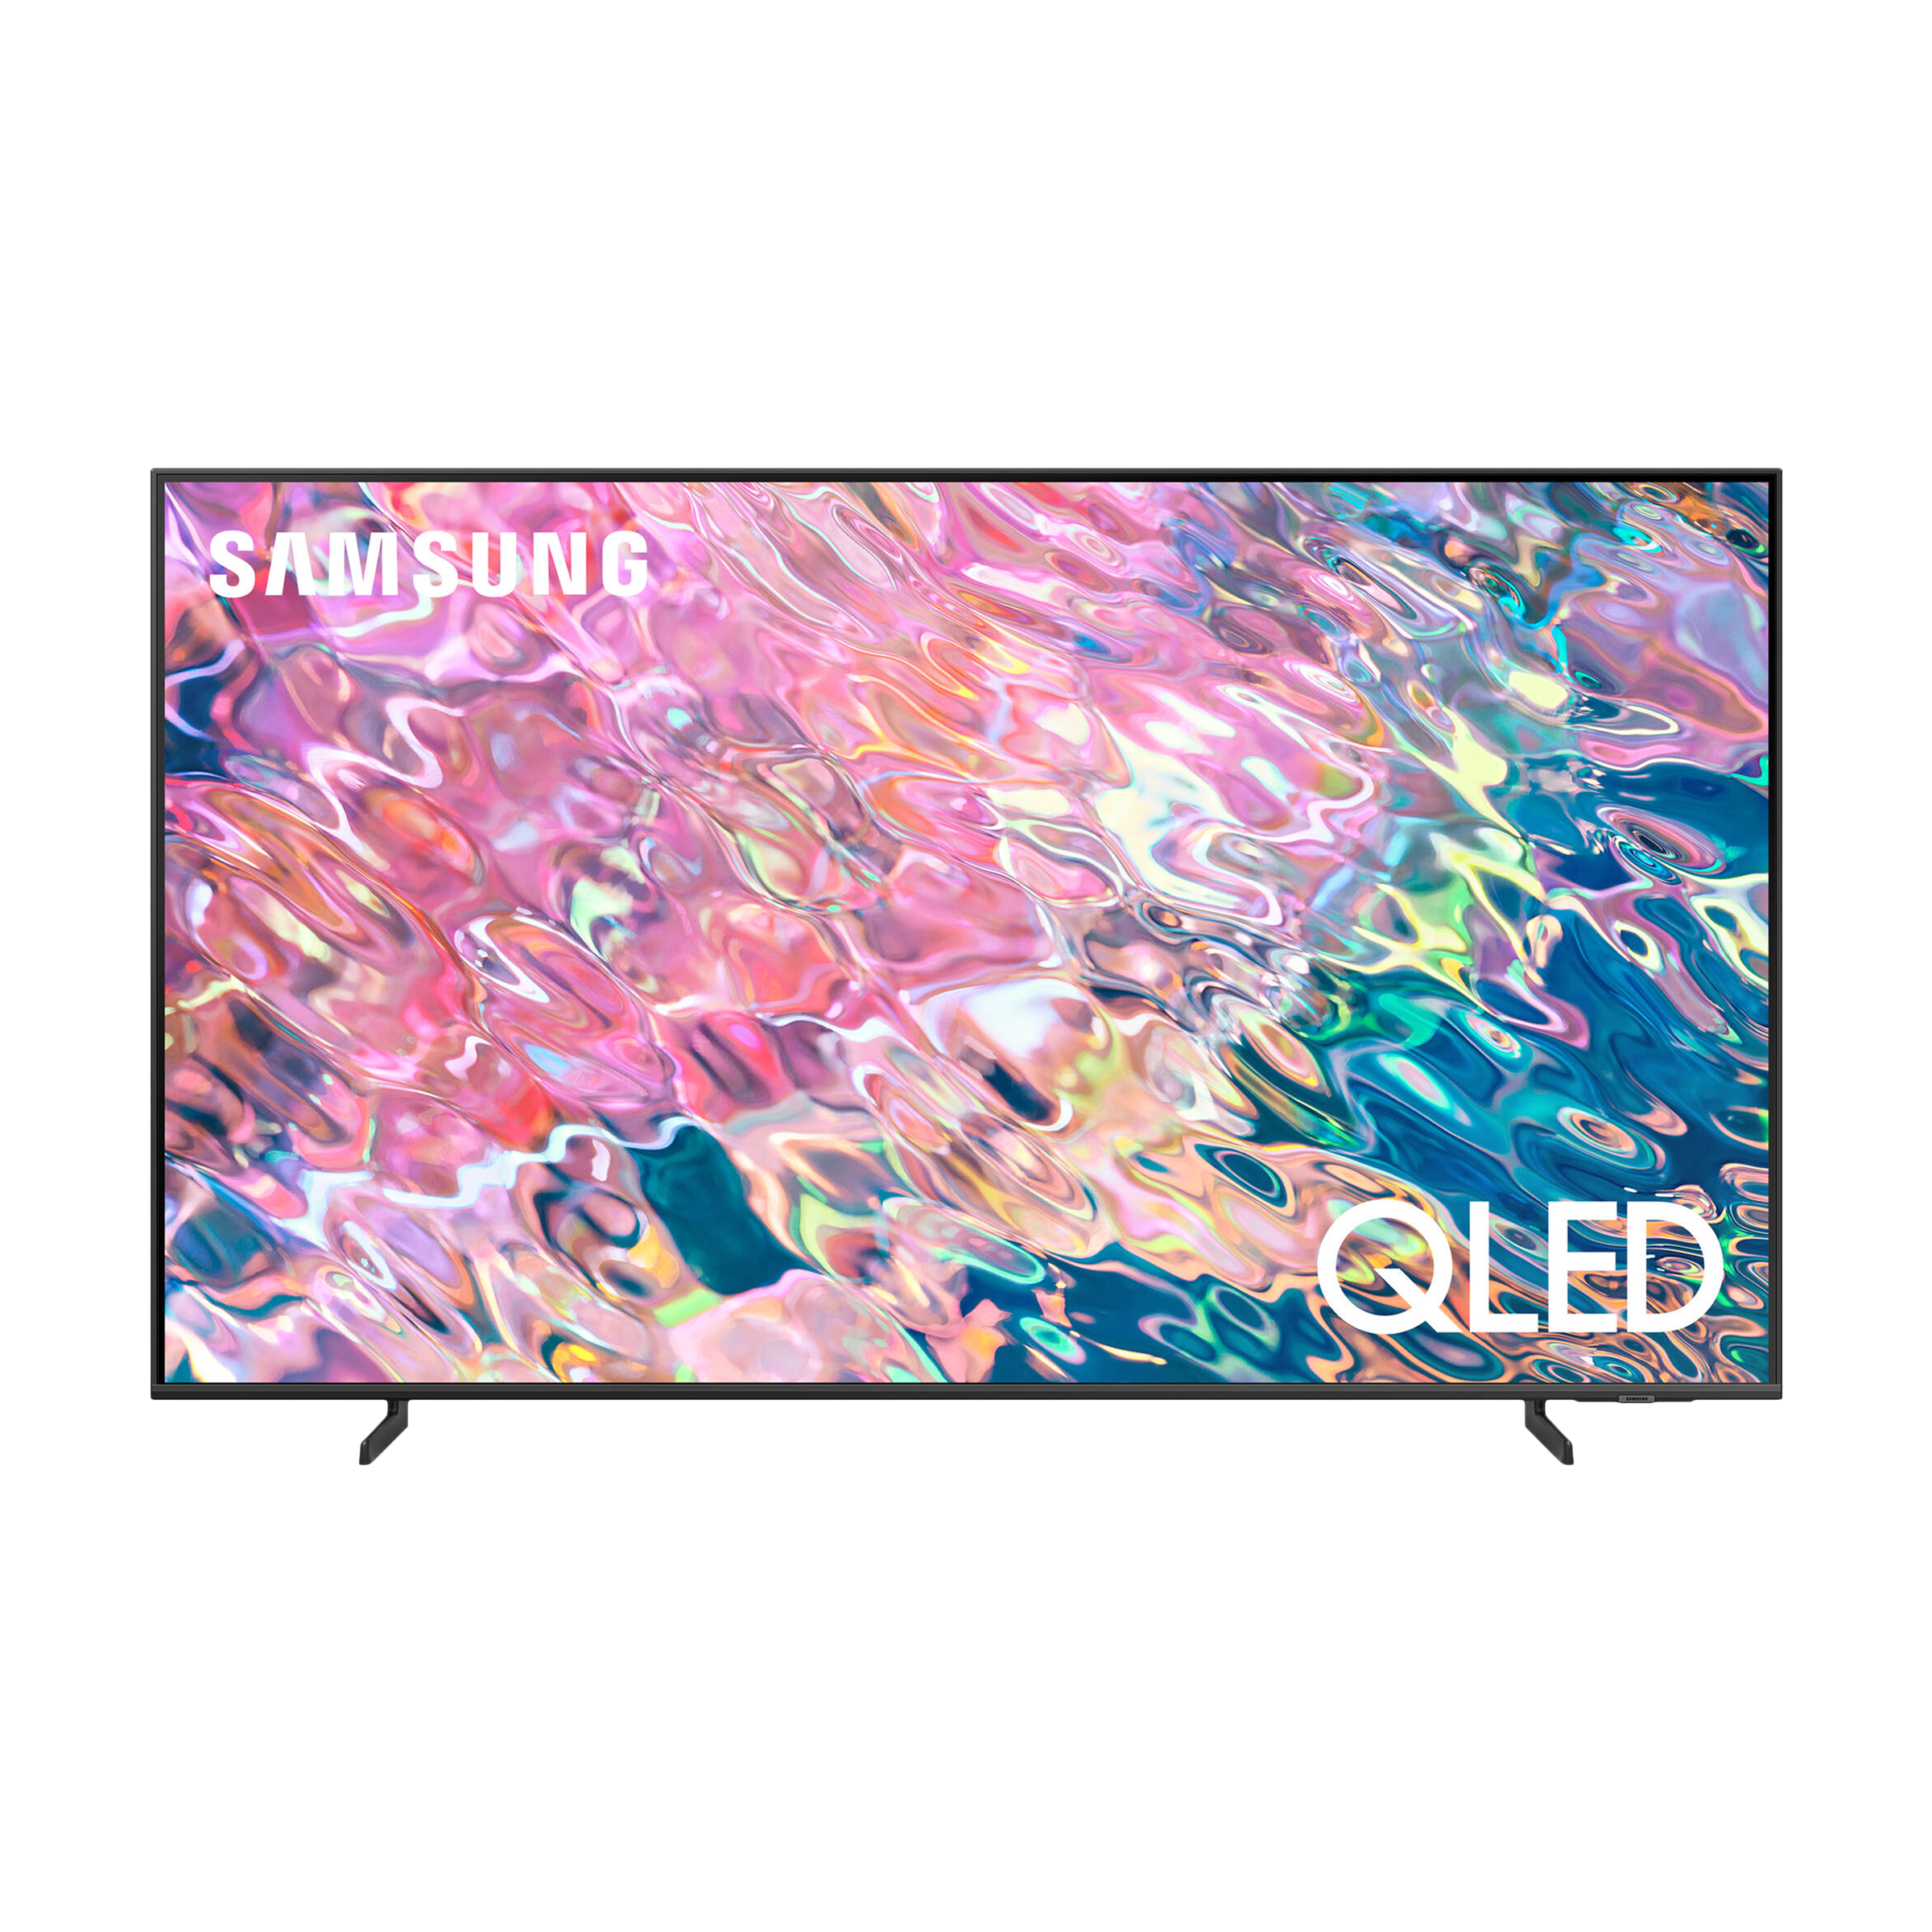 SAMSUNG Series 6 189 cm (75 inch) QLED 4K Ultra HD Tizen TV with Alexa Compatibility_1